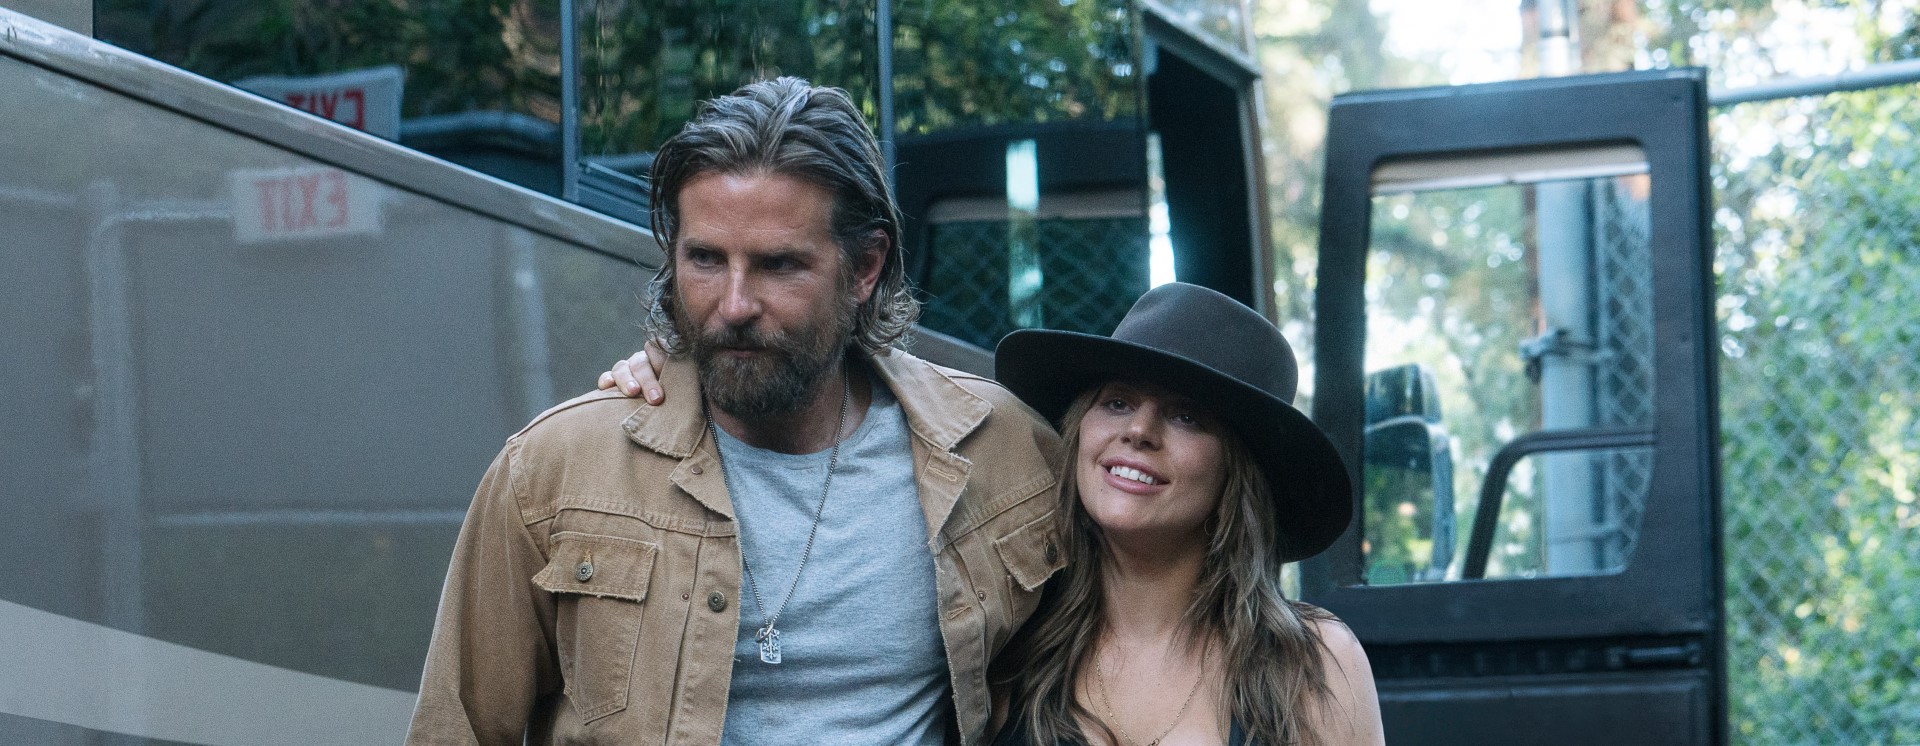 Review – A Star Is Born (2018)